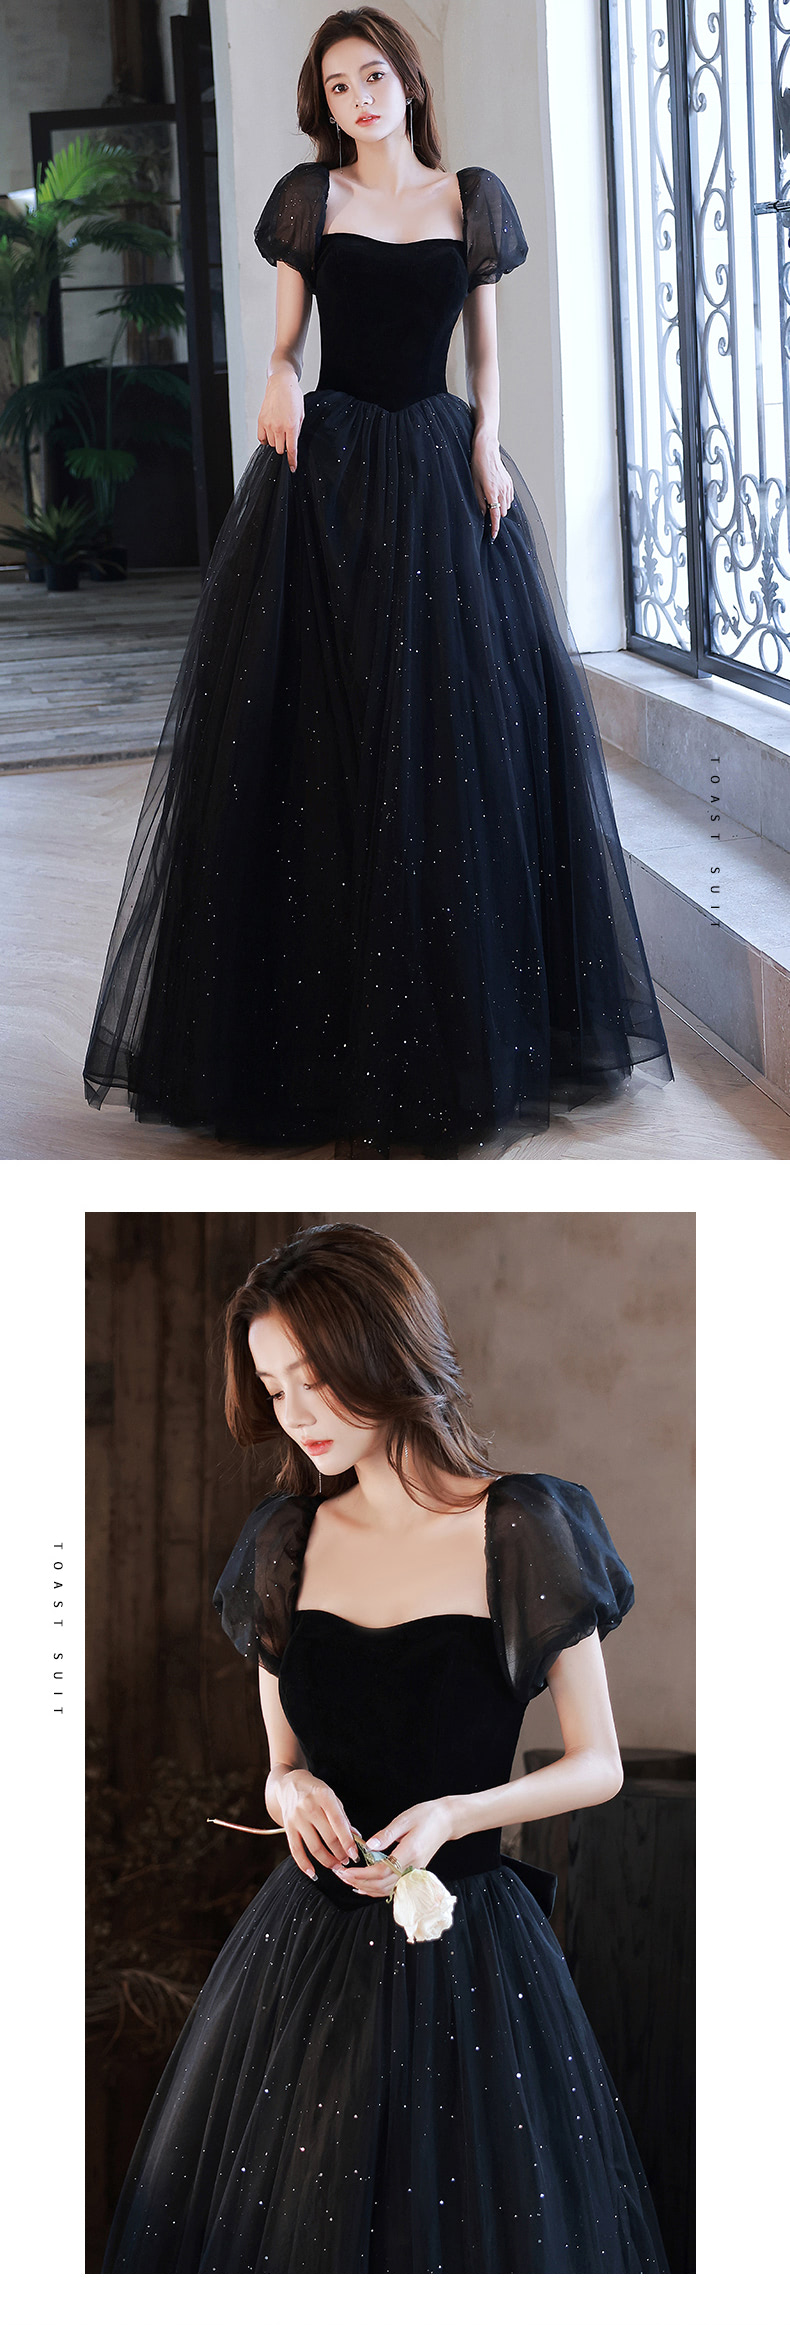 Black-Prom-Evening-Maxi-Dress-Homecoming-Outfit-with-Bowknot13.jpg